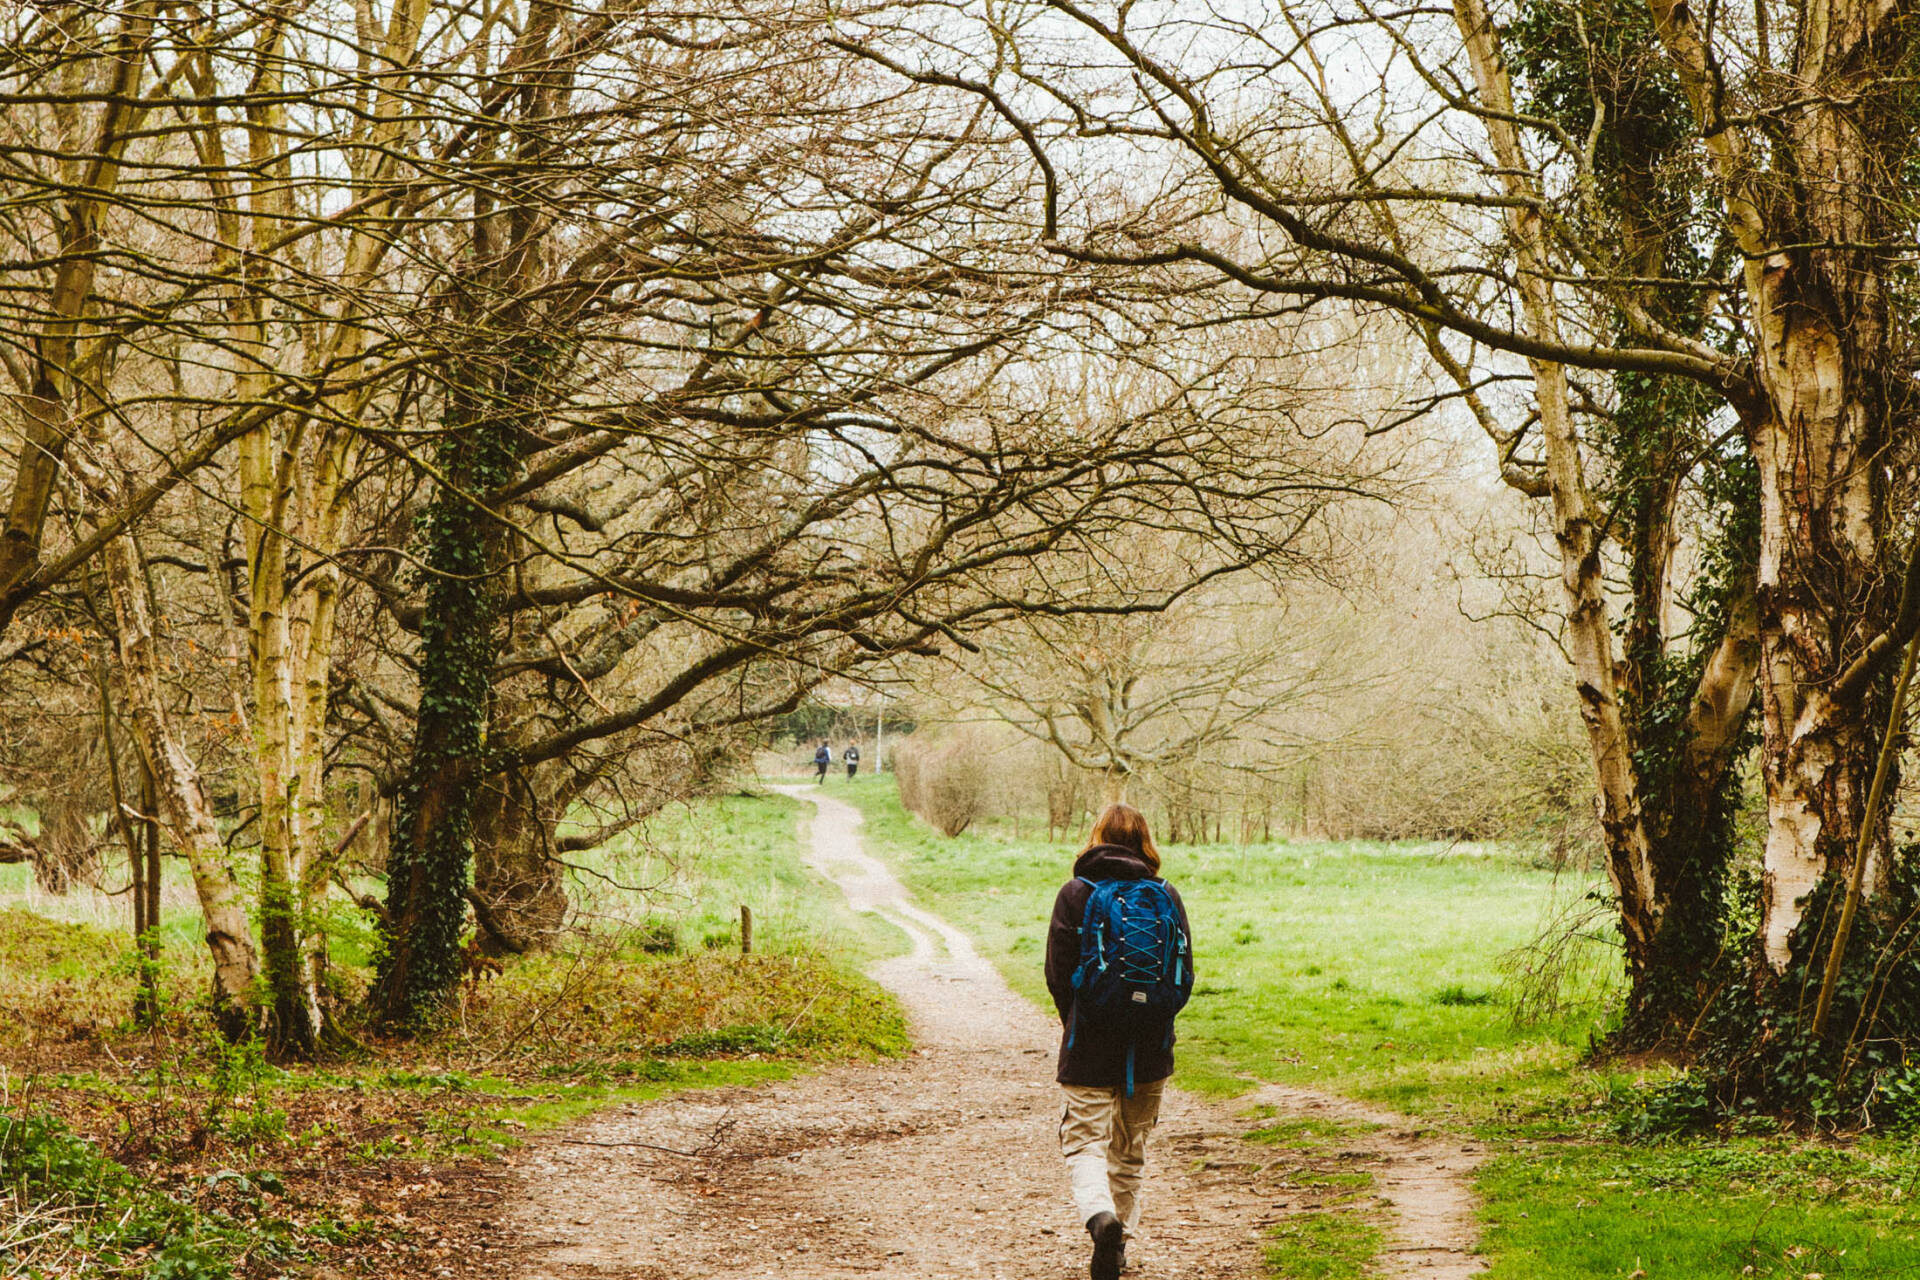 Someone walking down a dirt path with trees and greenery around.